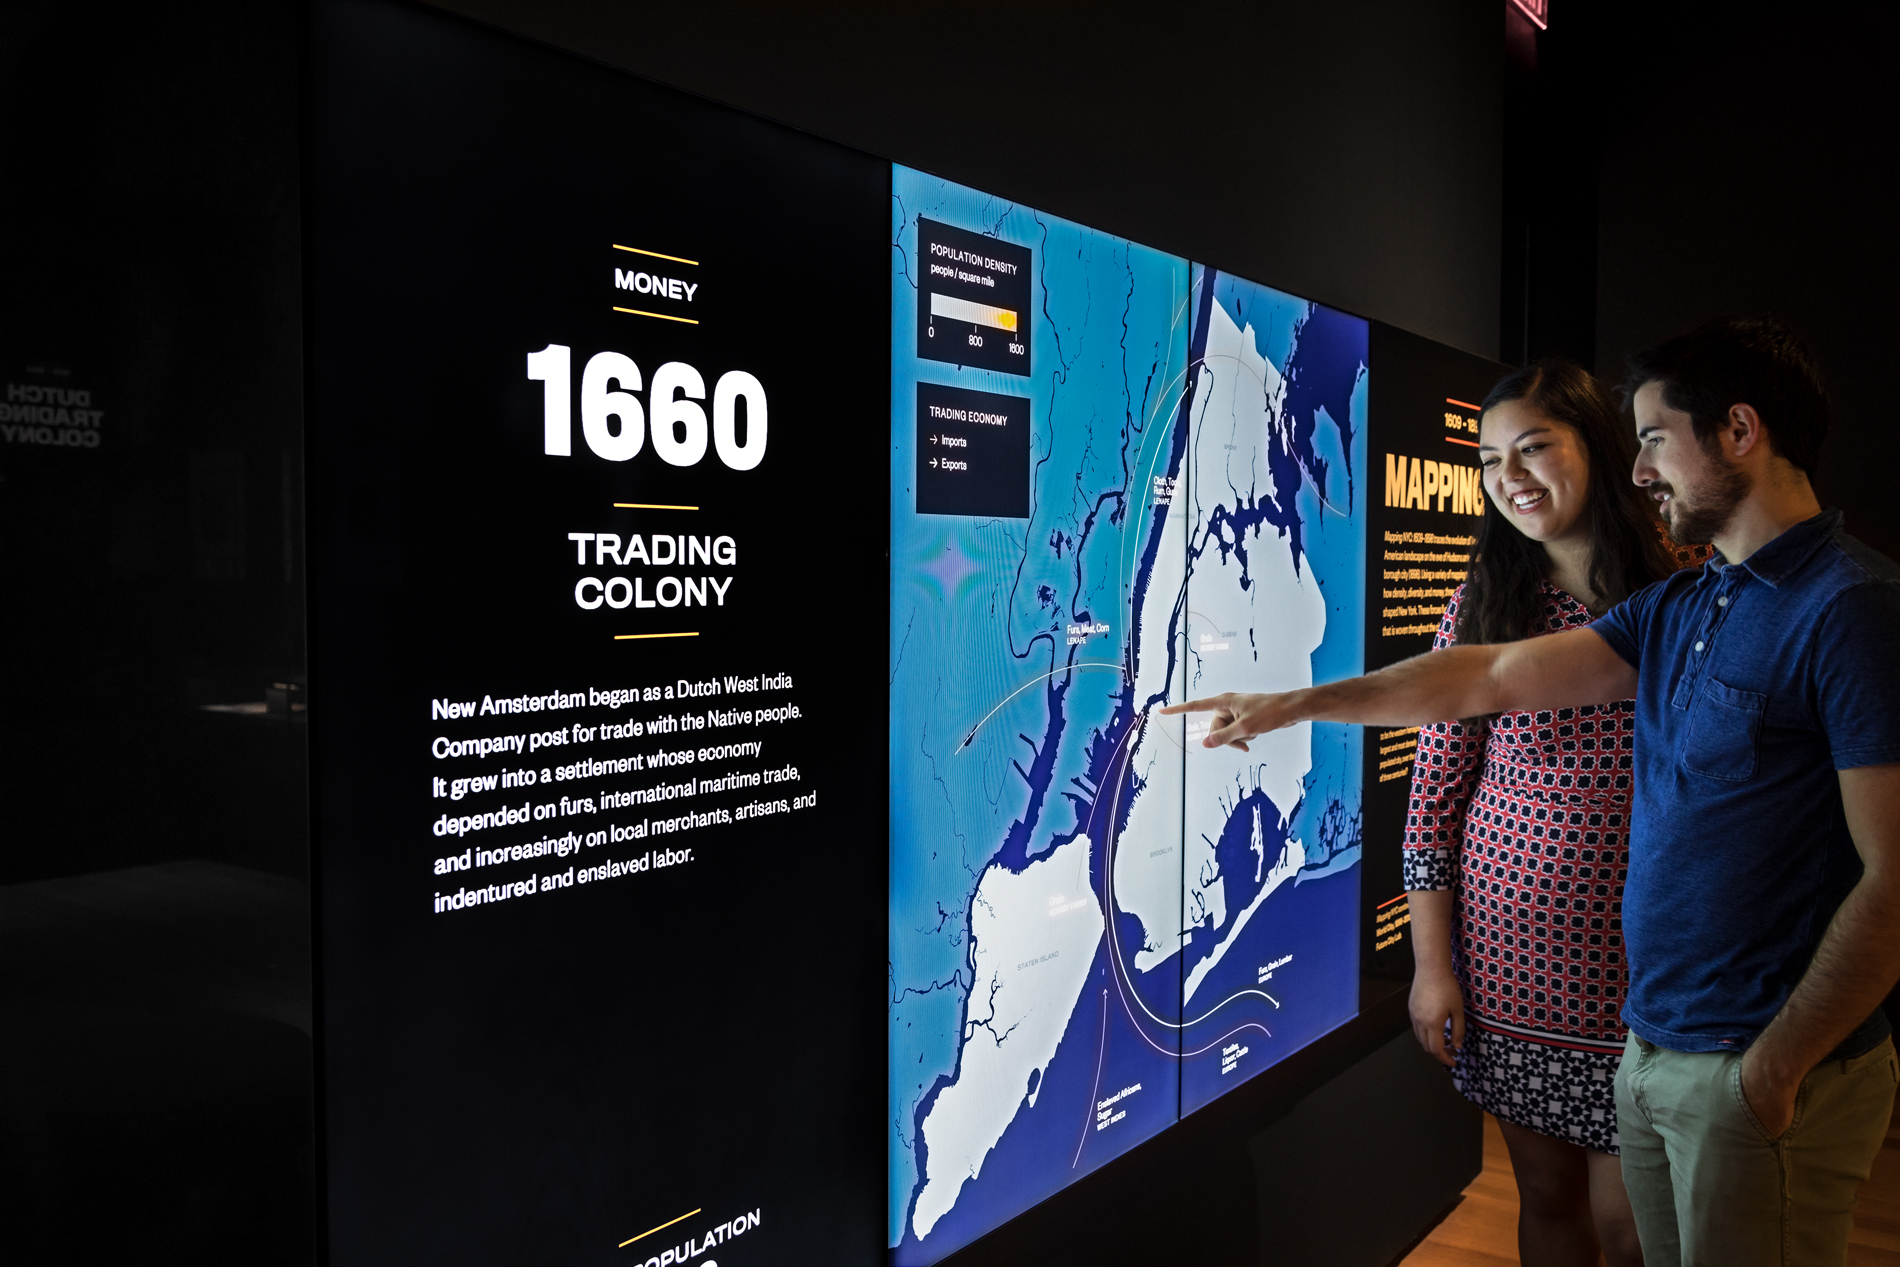 Two visitors point out details on a screen in an exhibition space